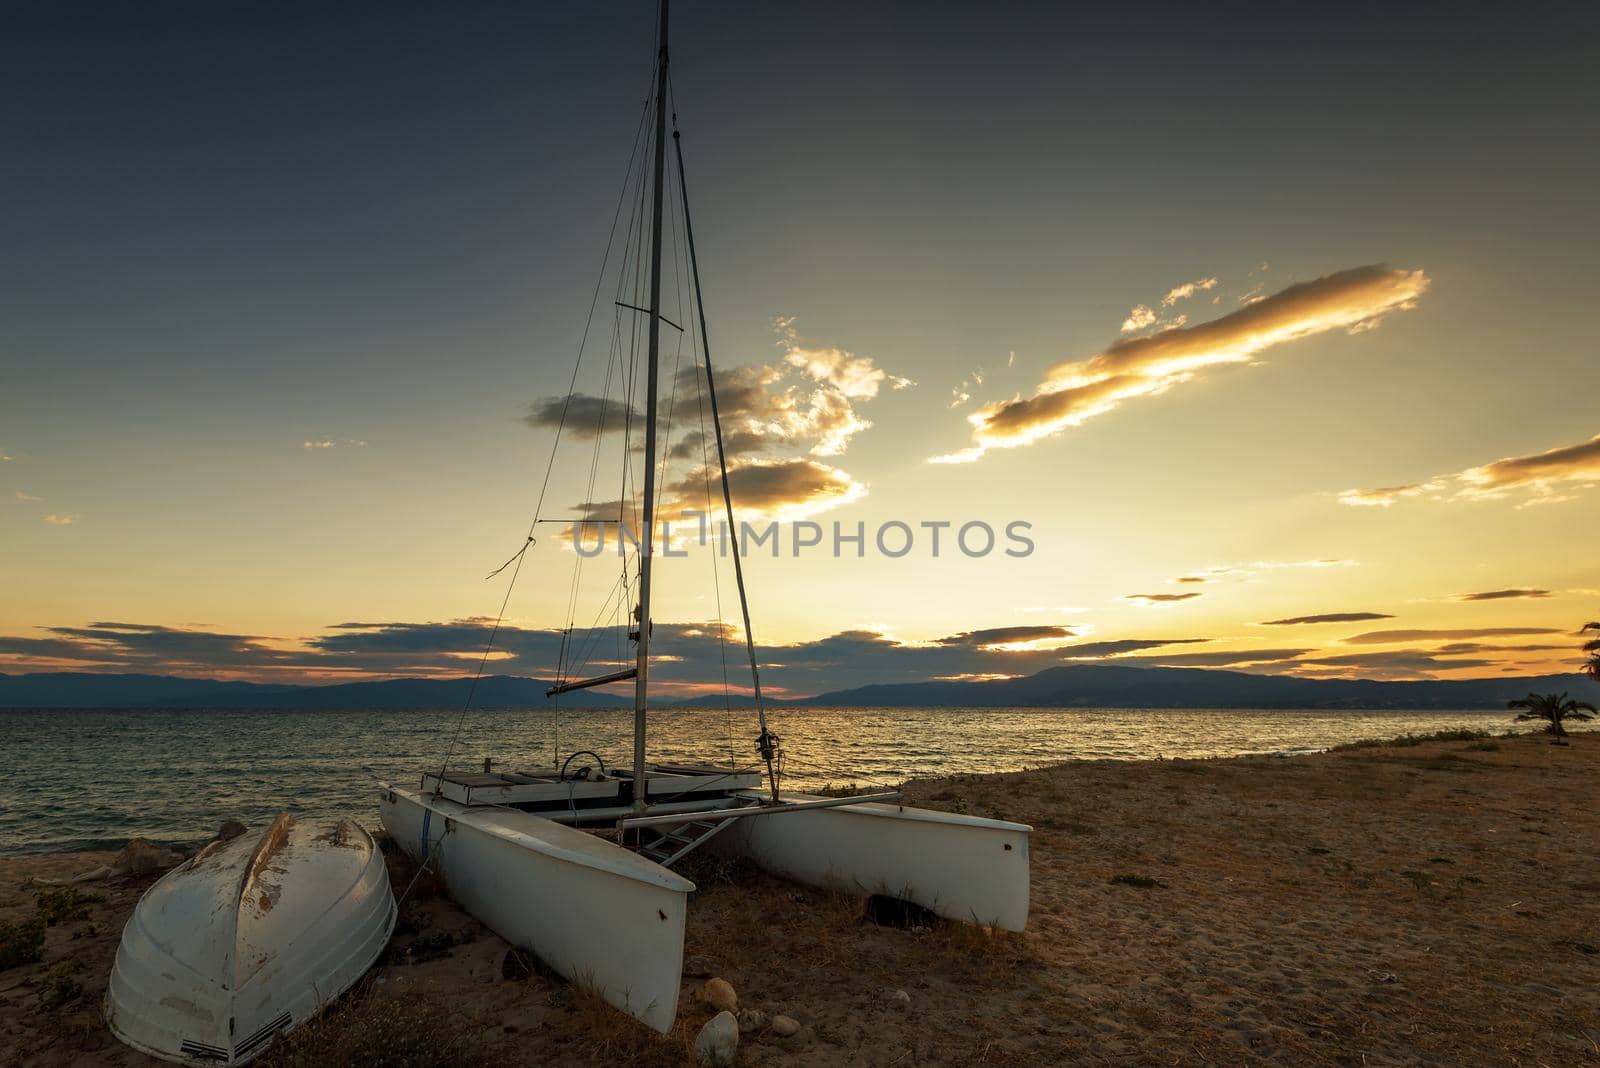 Sailboat on the beach at sunset in Greece.